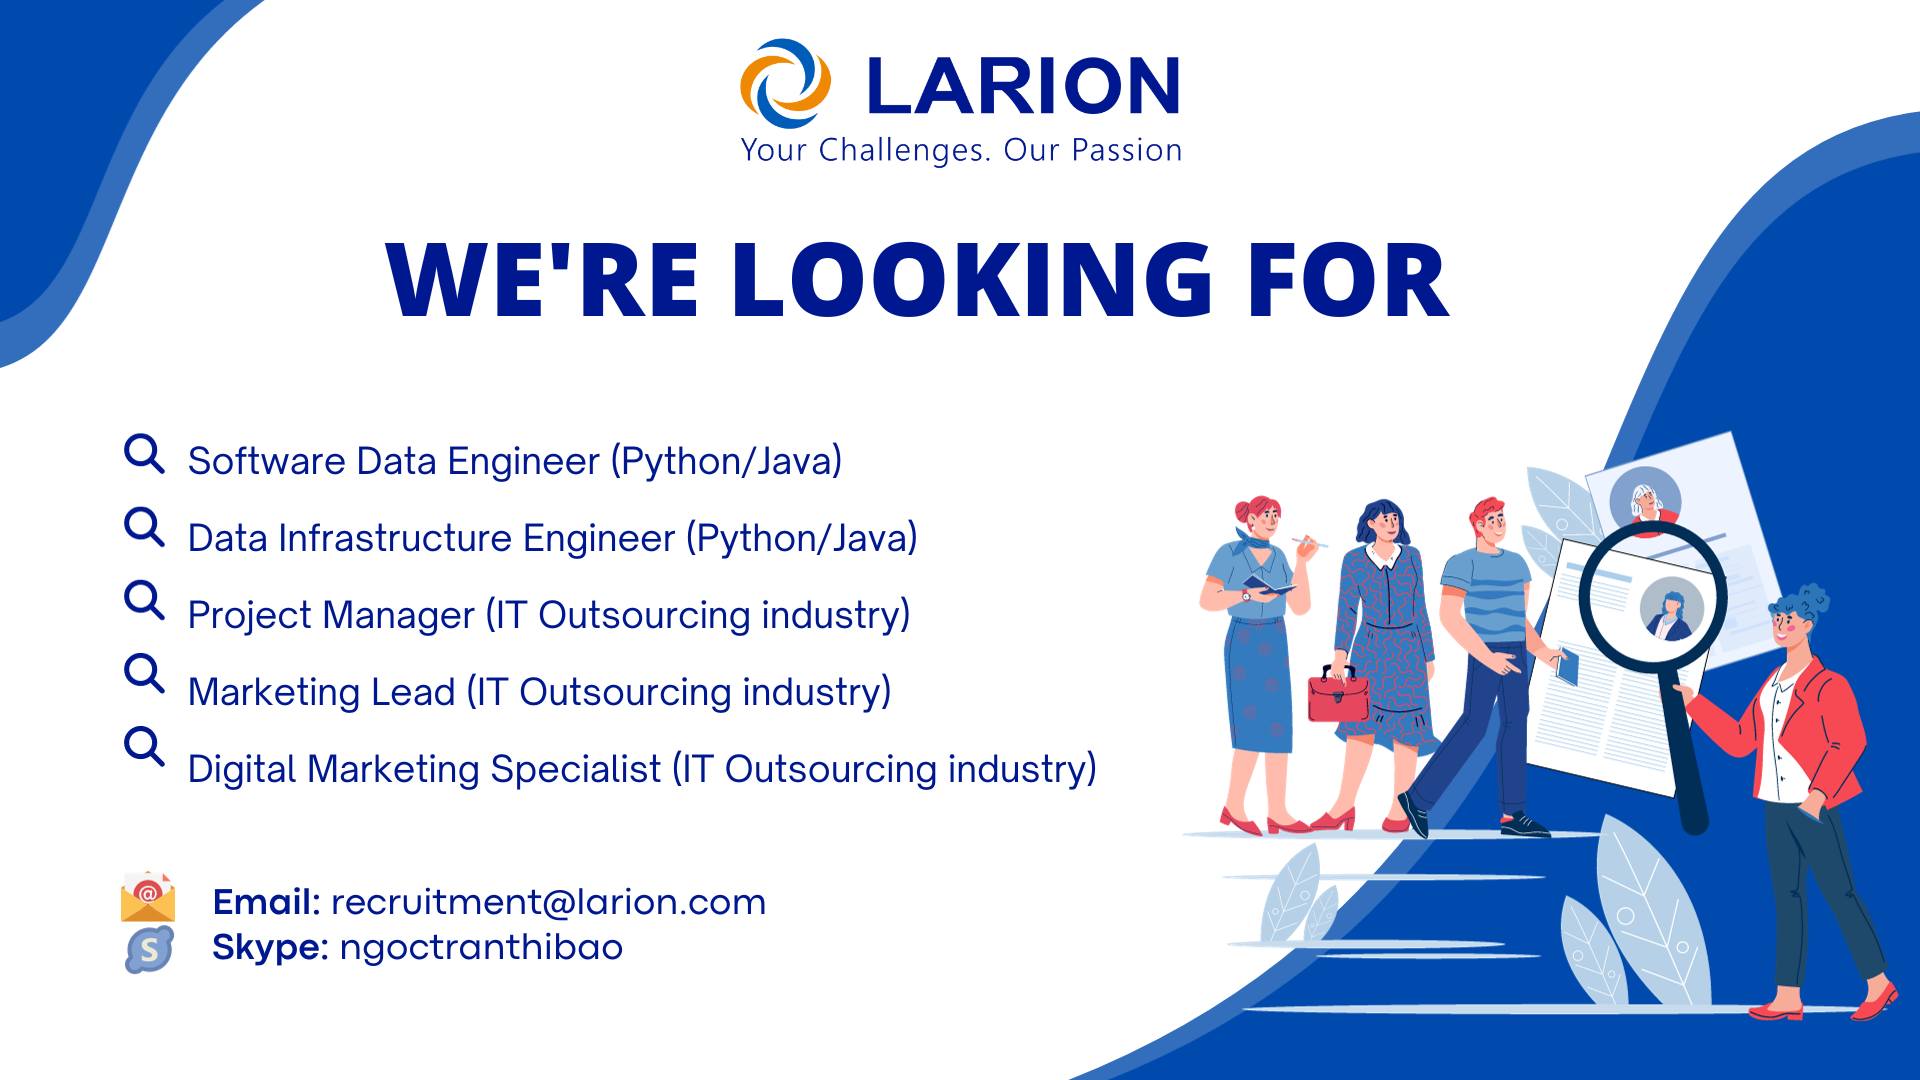 Job opportunities at LARION